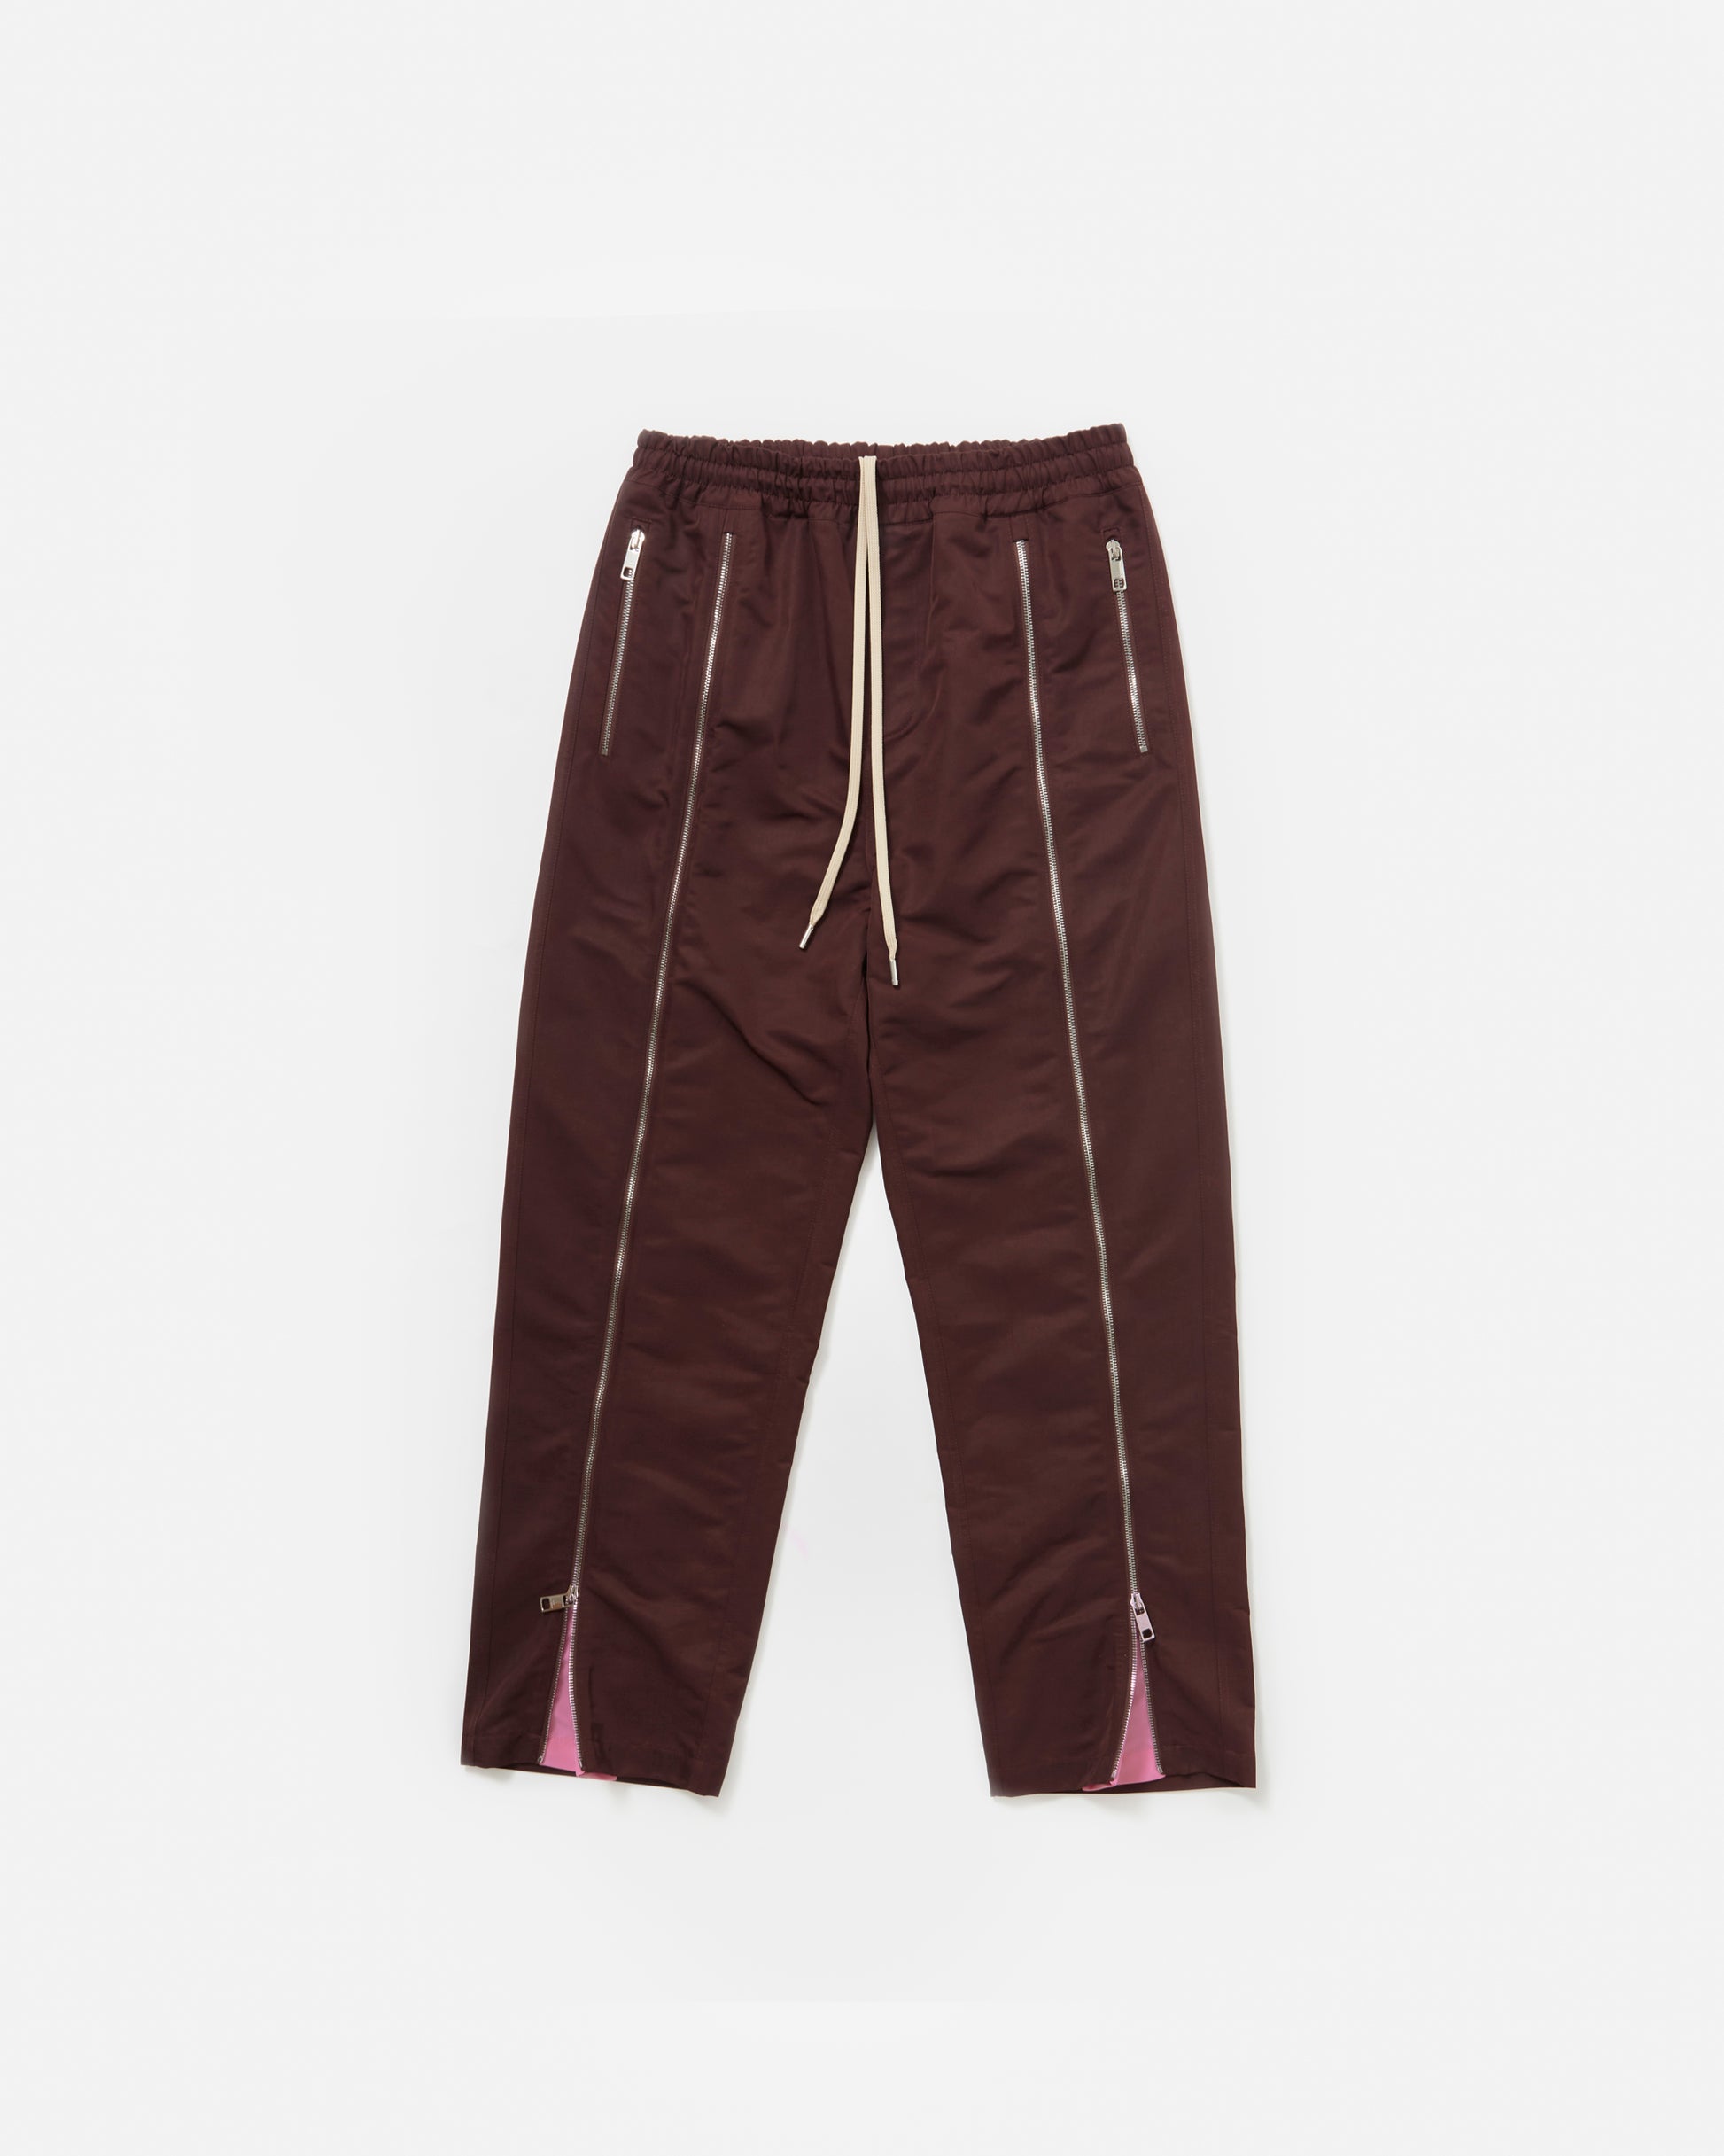 NYLON TRACK PANT WITH CONTRAST LEG INSERT - Due Diligence Apparel